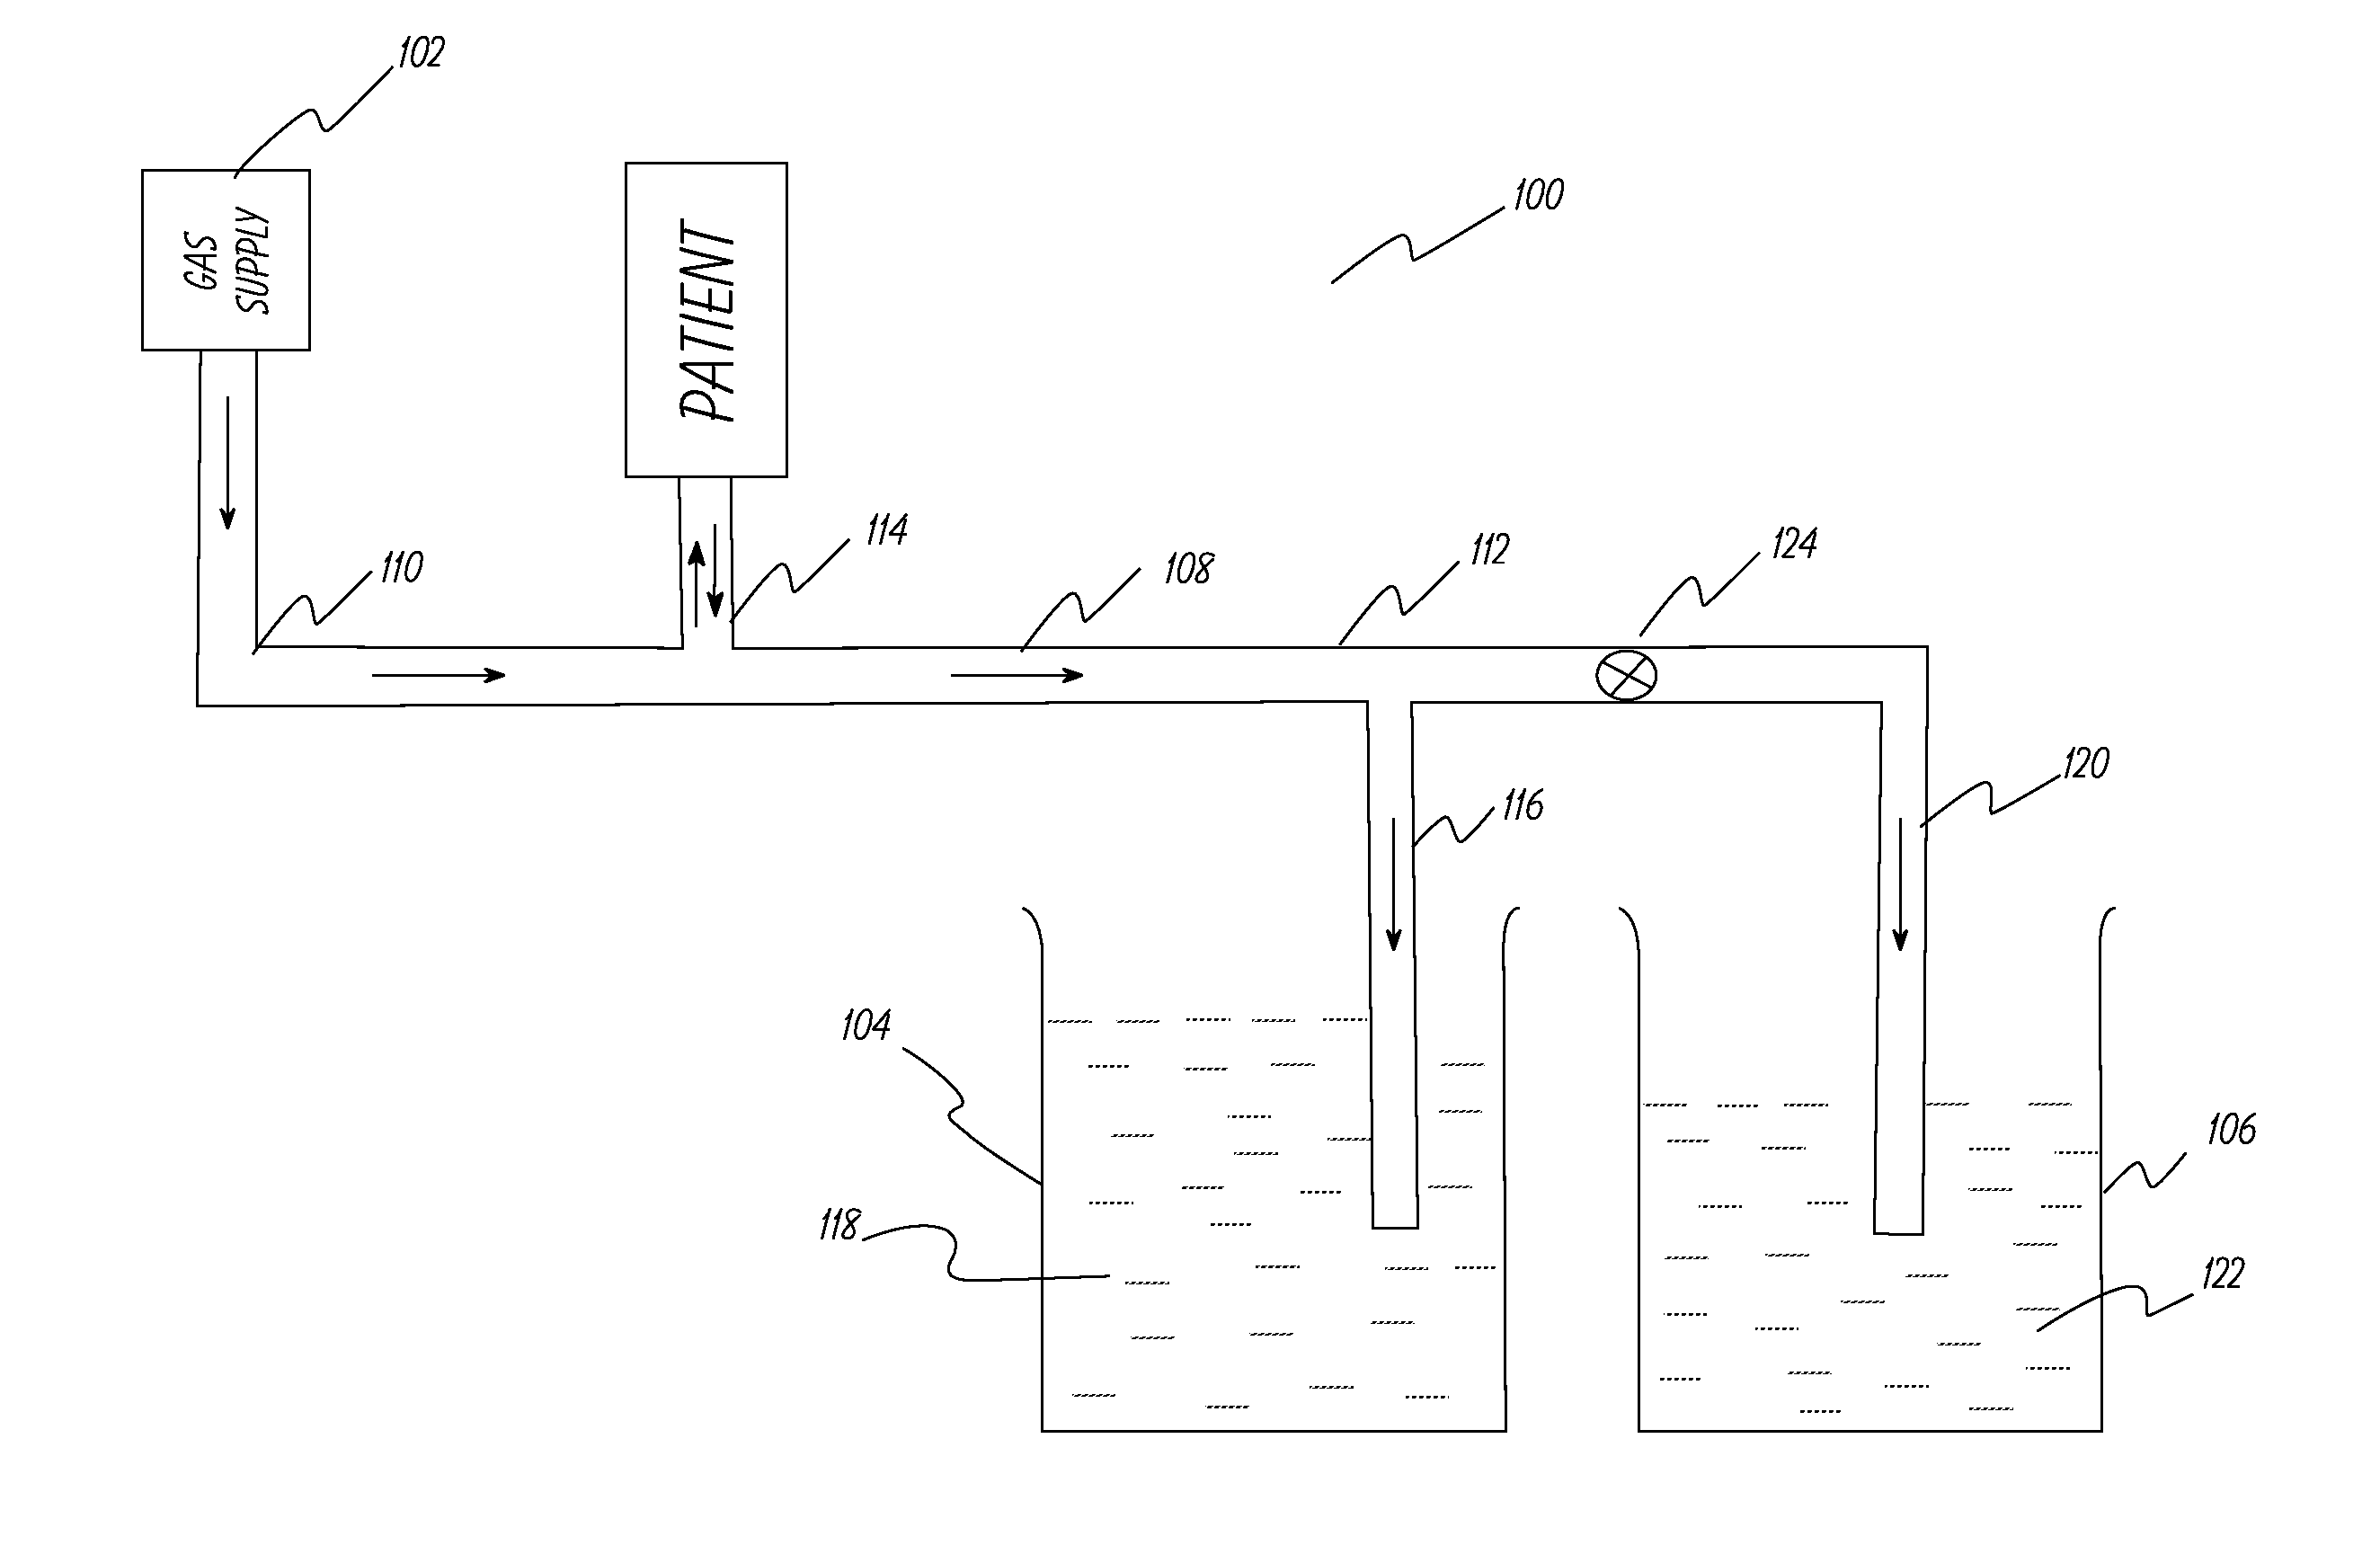 Apparatus and method to provide breathing support